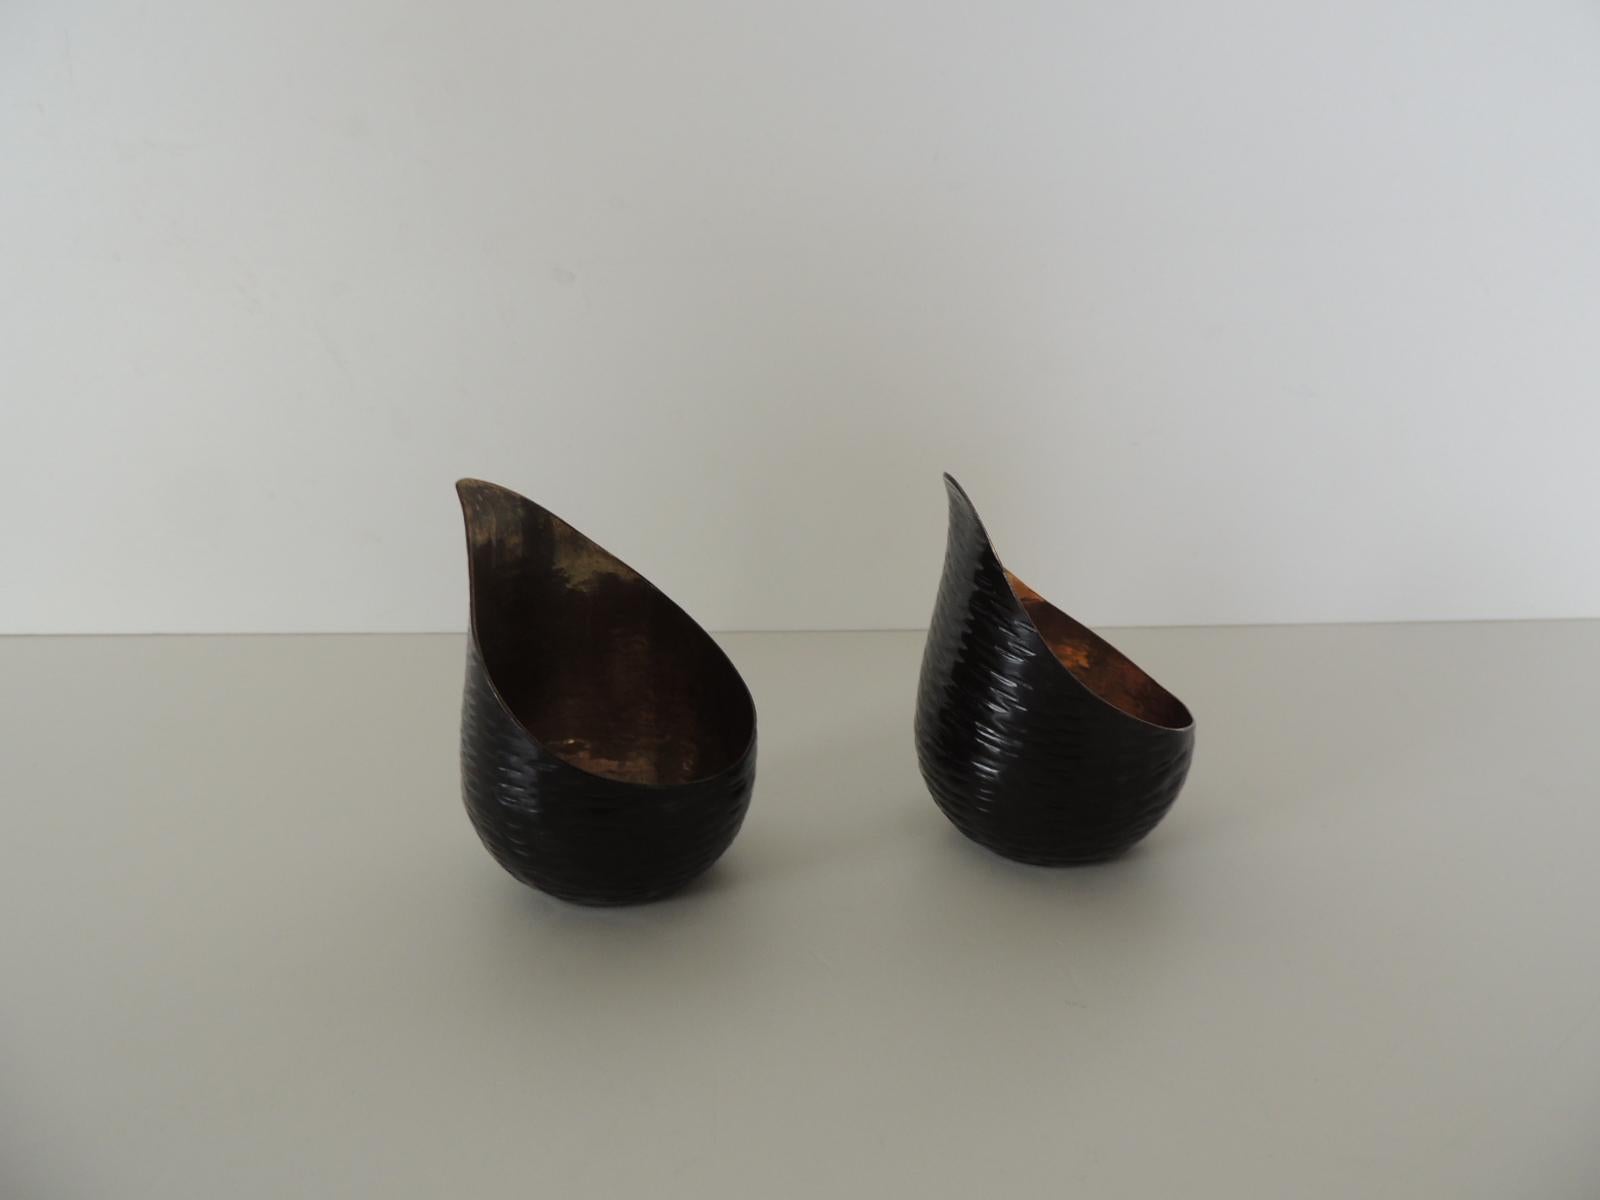 Pair of small brass modern tea light candle holders.
Shy black outside coated paint and polished brass interiors.
Made in India.
Size: 2.1/4